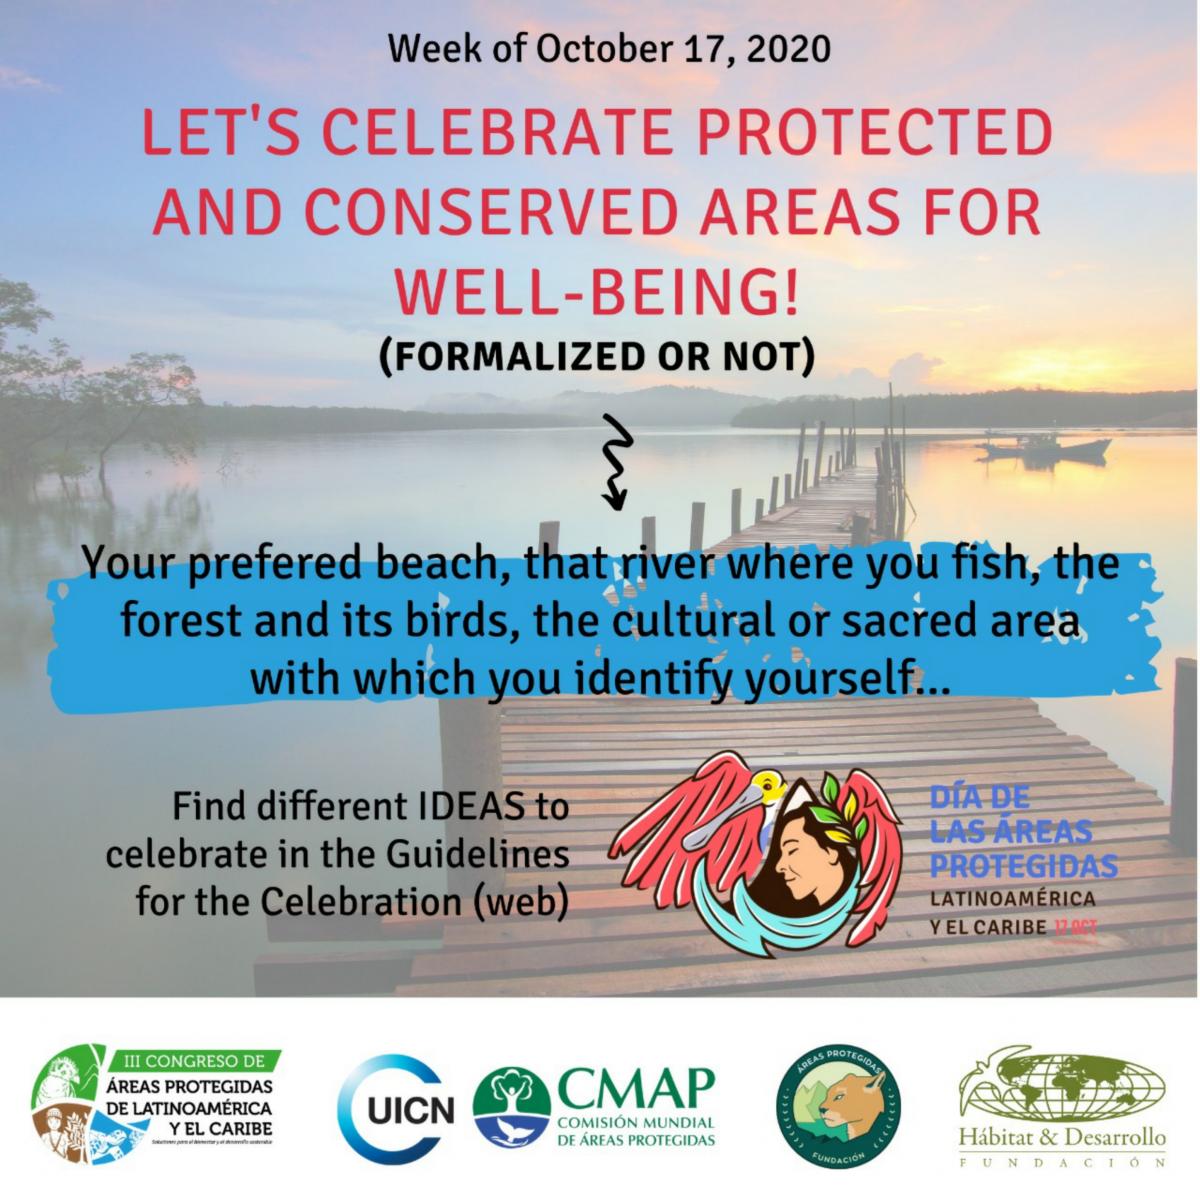 Celebration of Protected Areas in Latin America and the Caribbean